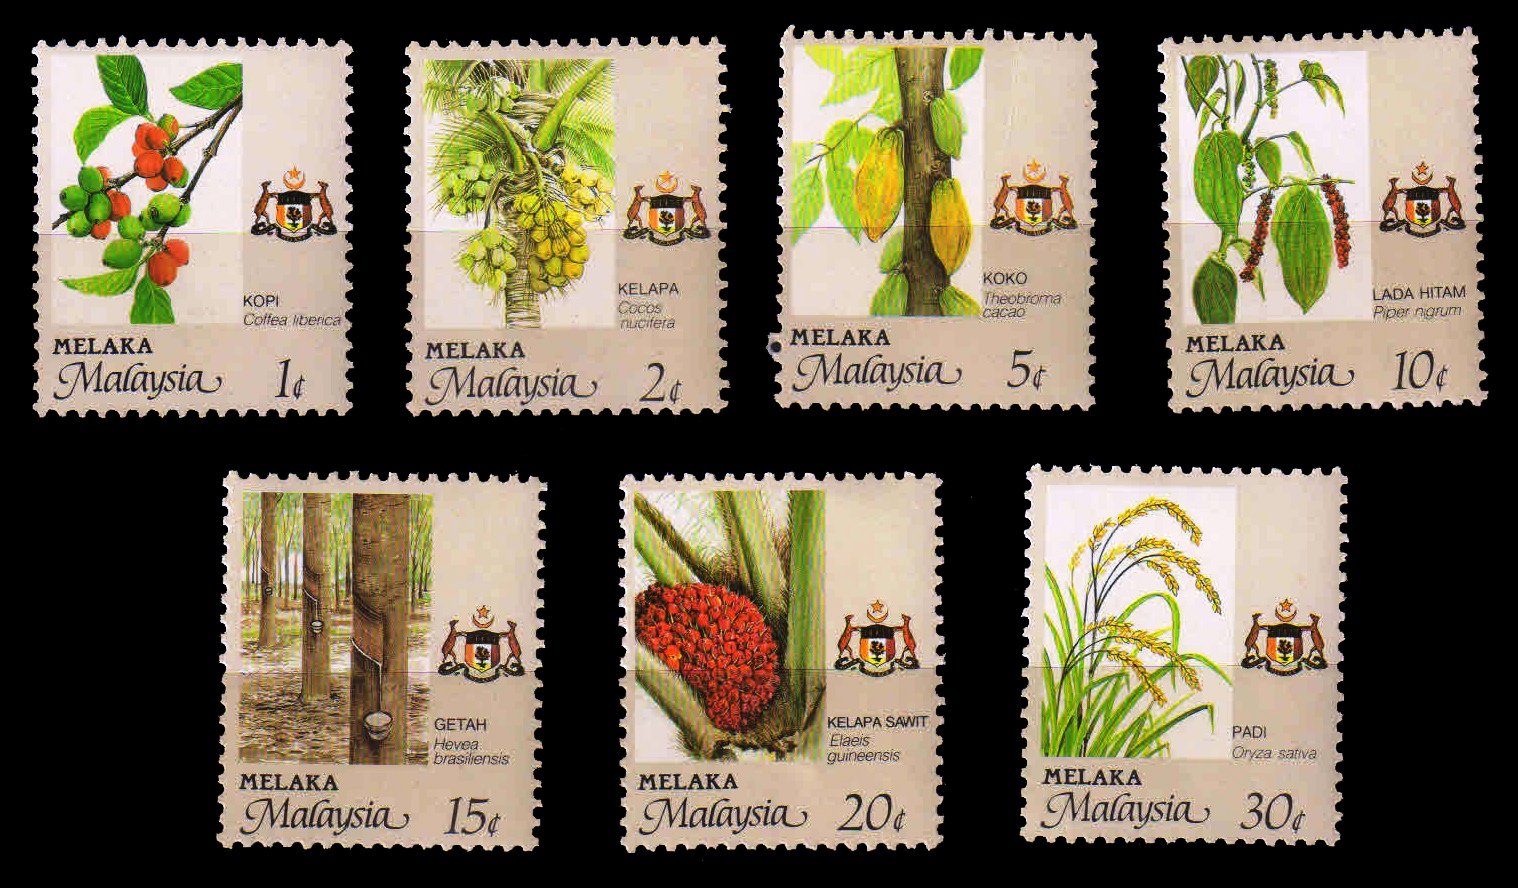 MALACCA 1986 - Agriculture. Rubber, Coffee, Coconuts, Cocoa, Black Paper, Oil Palm, Rice. Set of 7 Stamp, MNH. S.G. 96-102